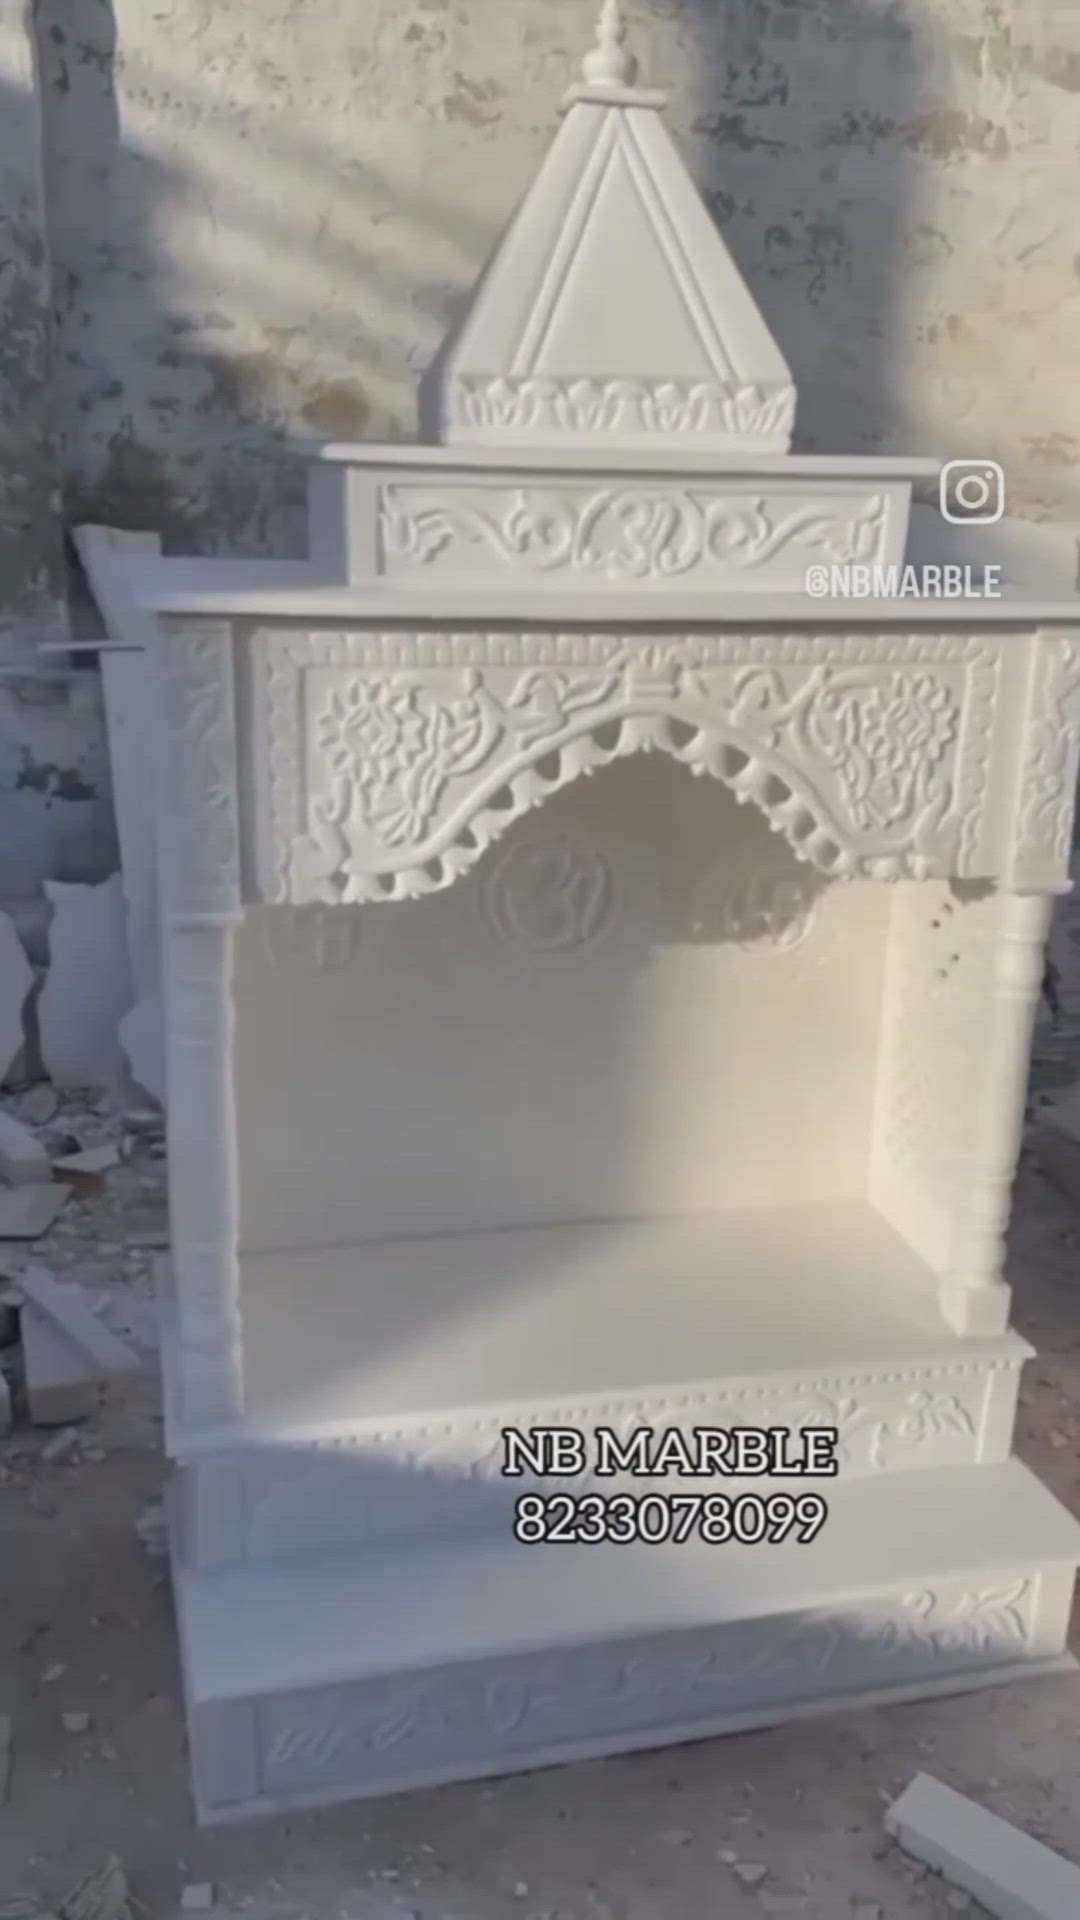 White Marble Carving Temple

Decor your Pooja Room with beautiful Temple

We are manufacturer of marble and sandstone temple

We make any design according to your requirement and size

Follow me on instagram @nbmarble

More Information Contact Me
8233078099

#templearchitecture #temples #marblework #nbmarble #poojaroom #poojaroomdecor #poojaroomdesign #whitemarble #whitemarblestone